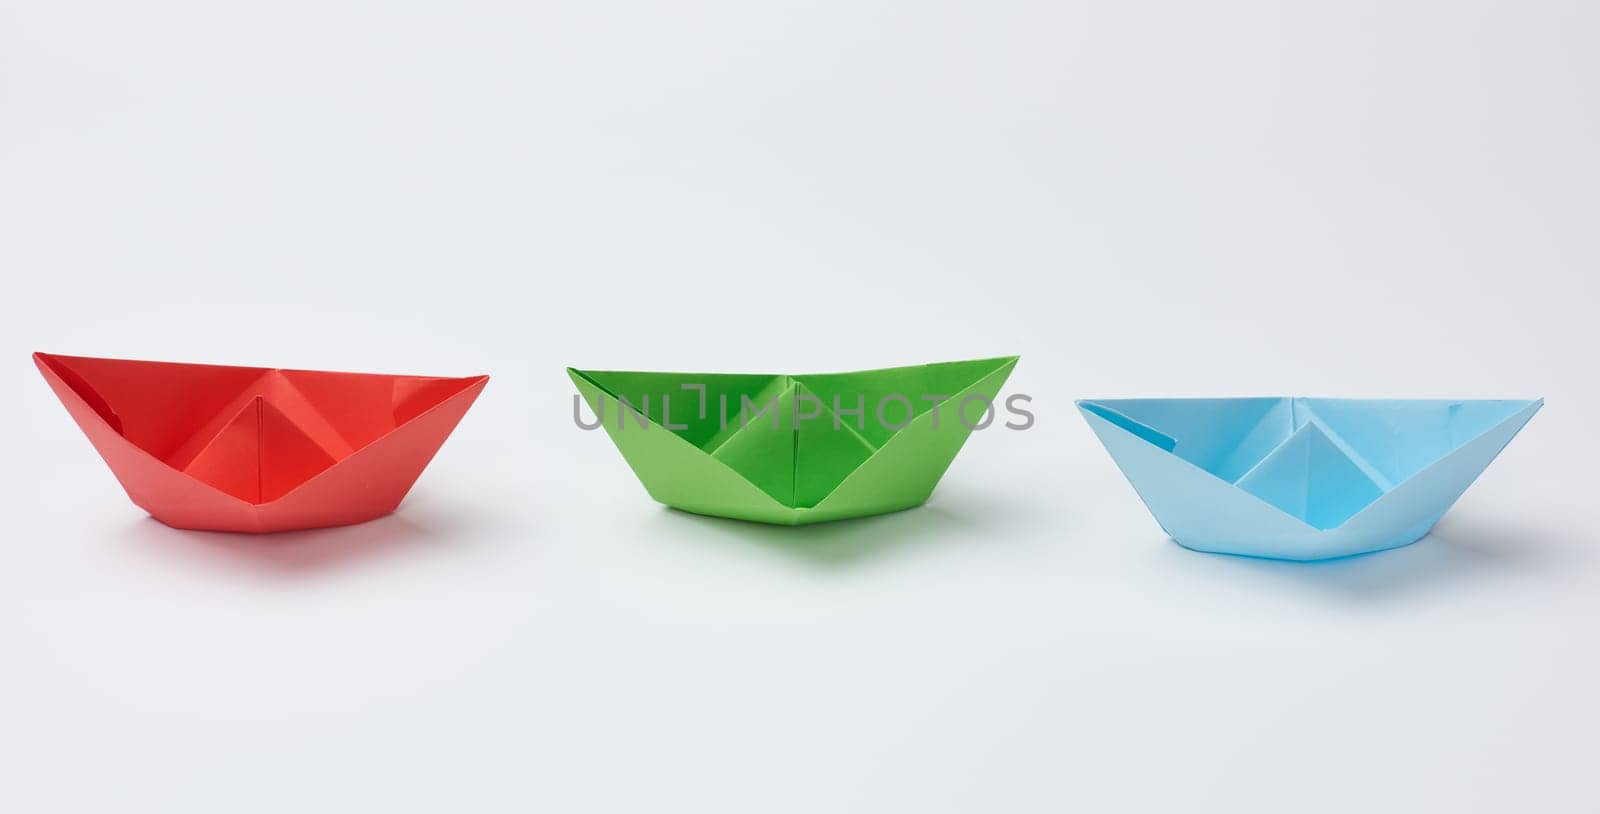 Three paper boats on a white background by ndanko